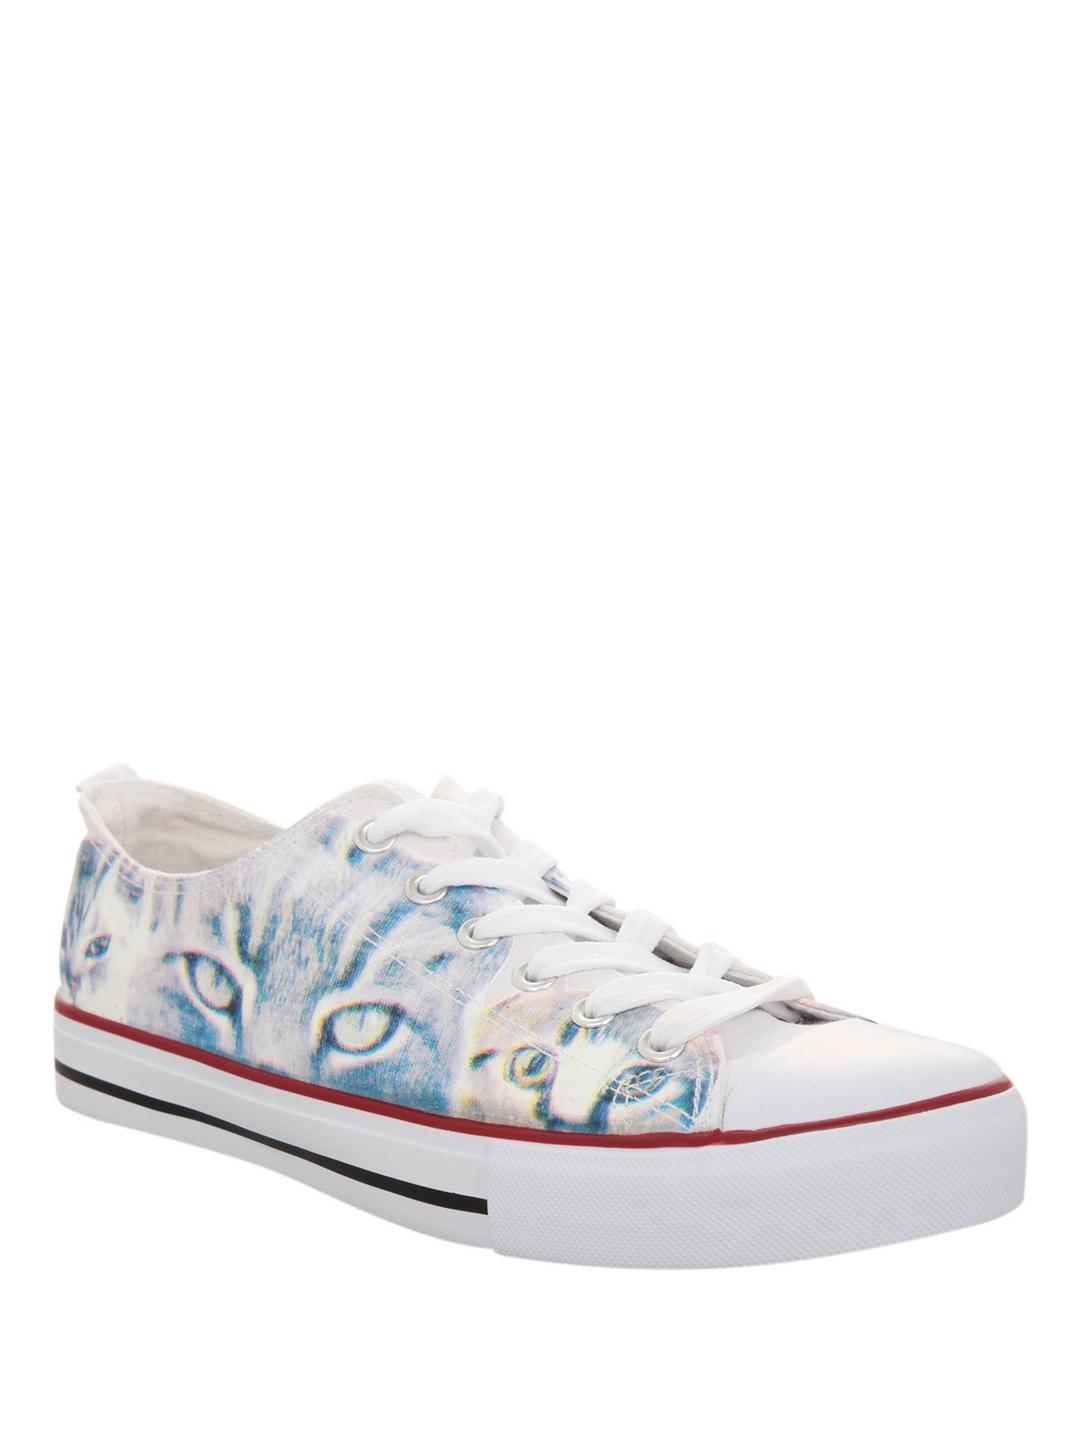 Cats Lace-Up Sneakers, WHITE, hi-res